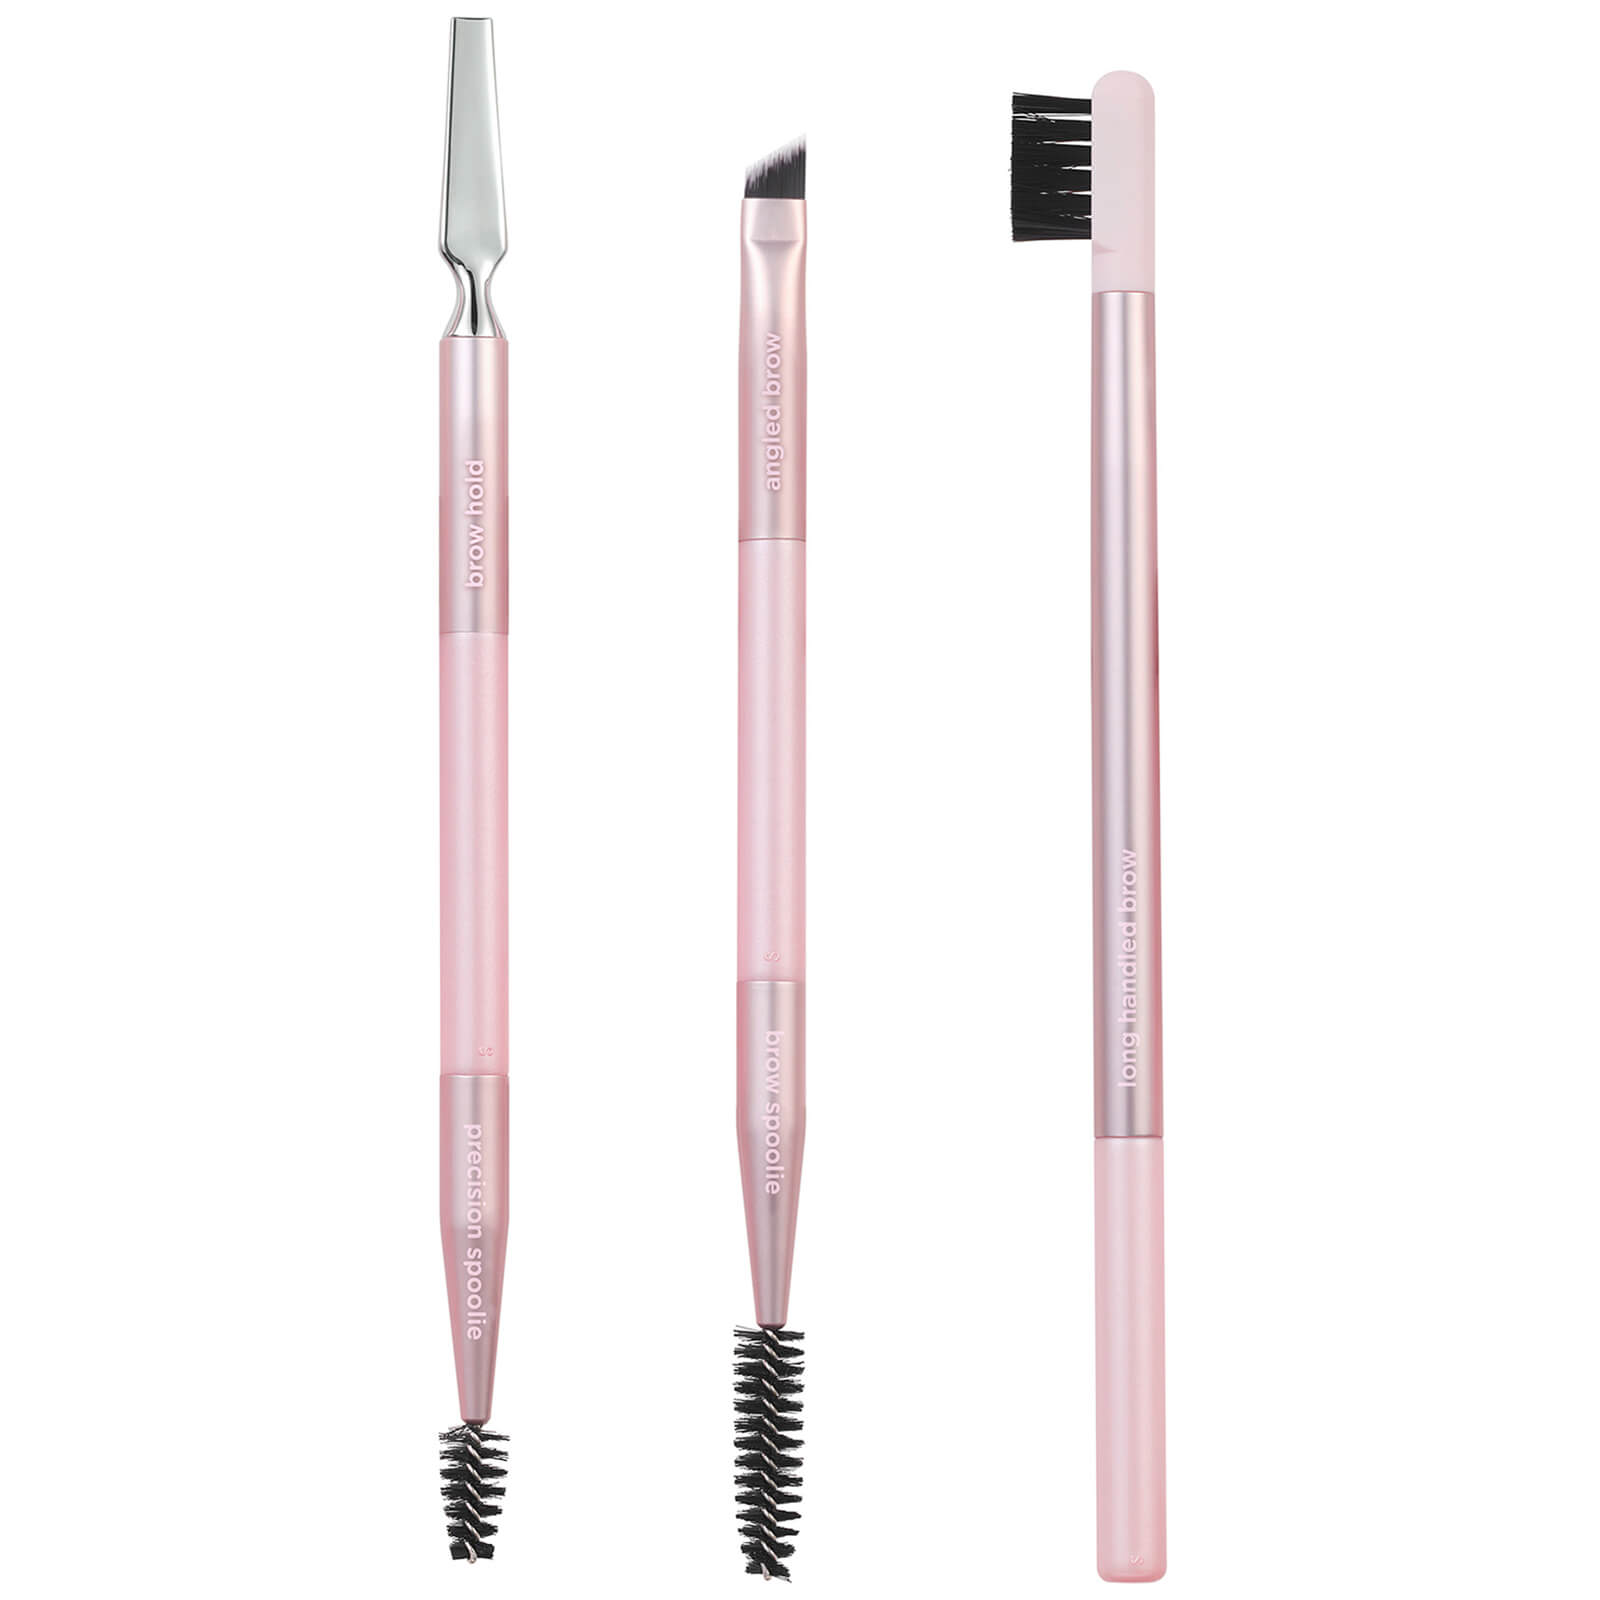 Image of Real Techniques Brow Styling Set